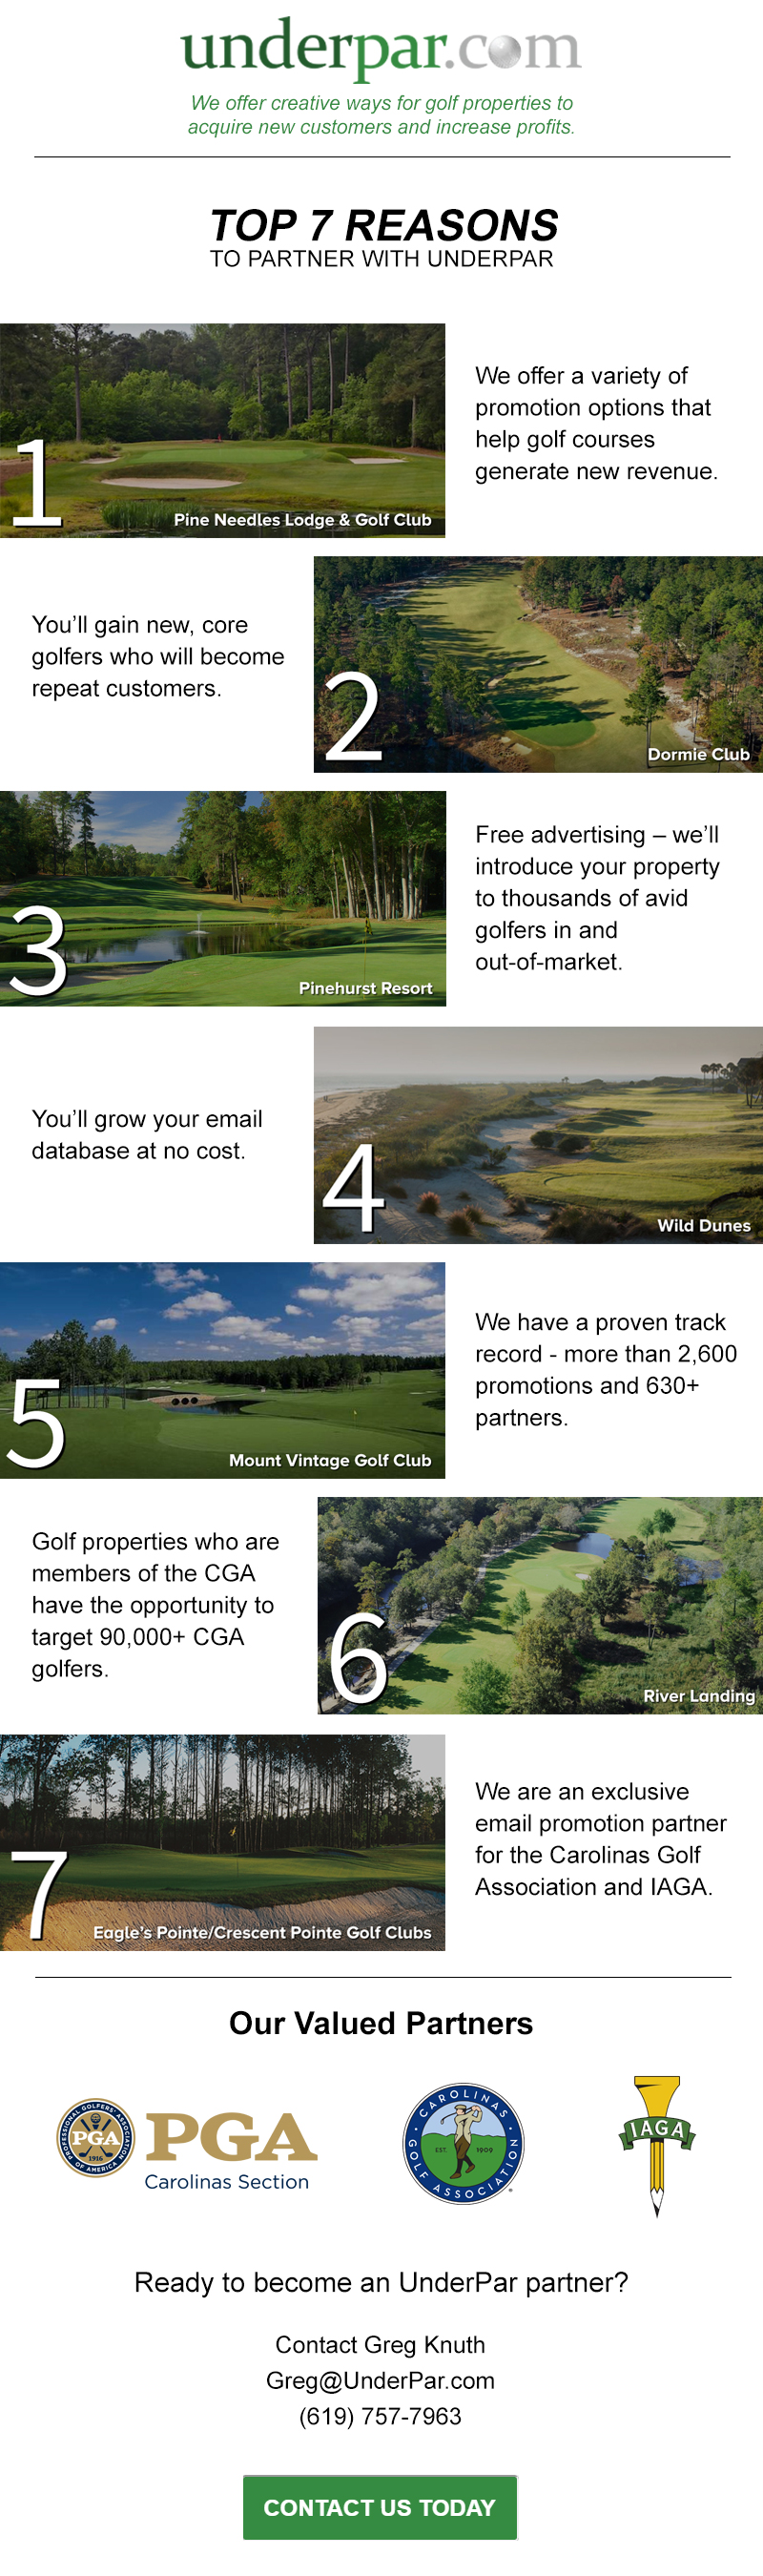 Top 7 Reasons To Partner With UnderPar